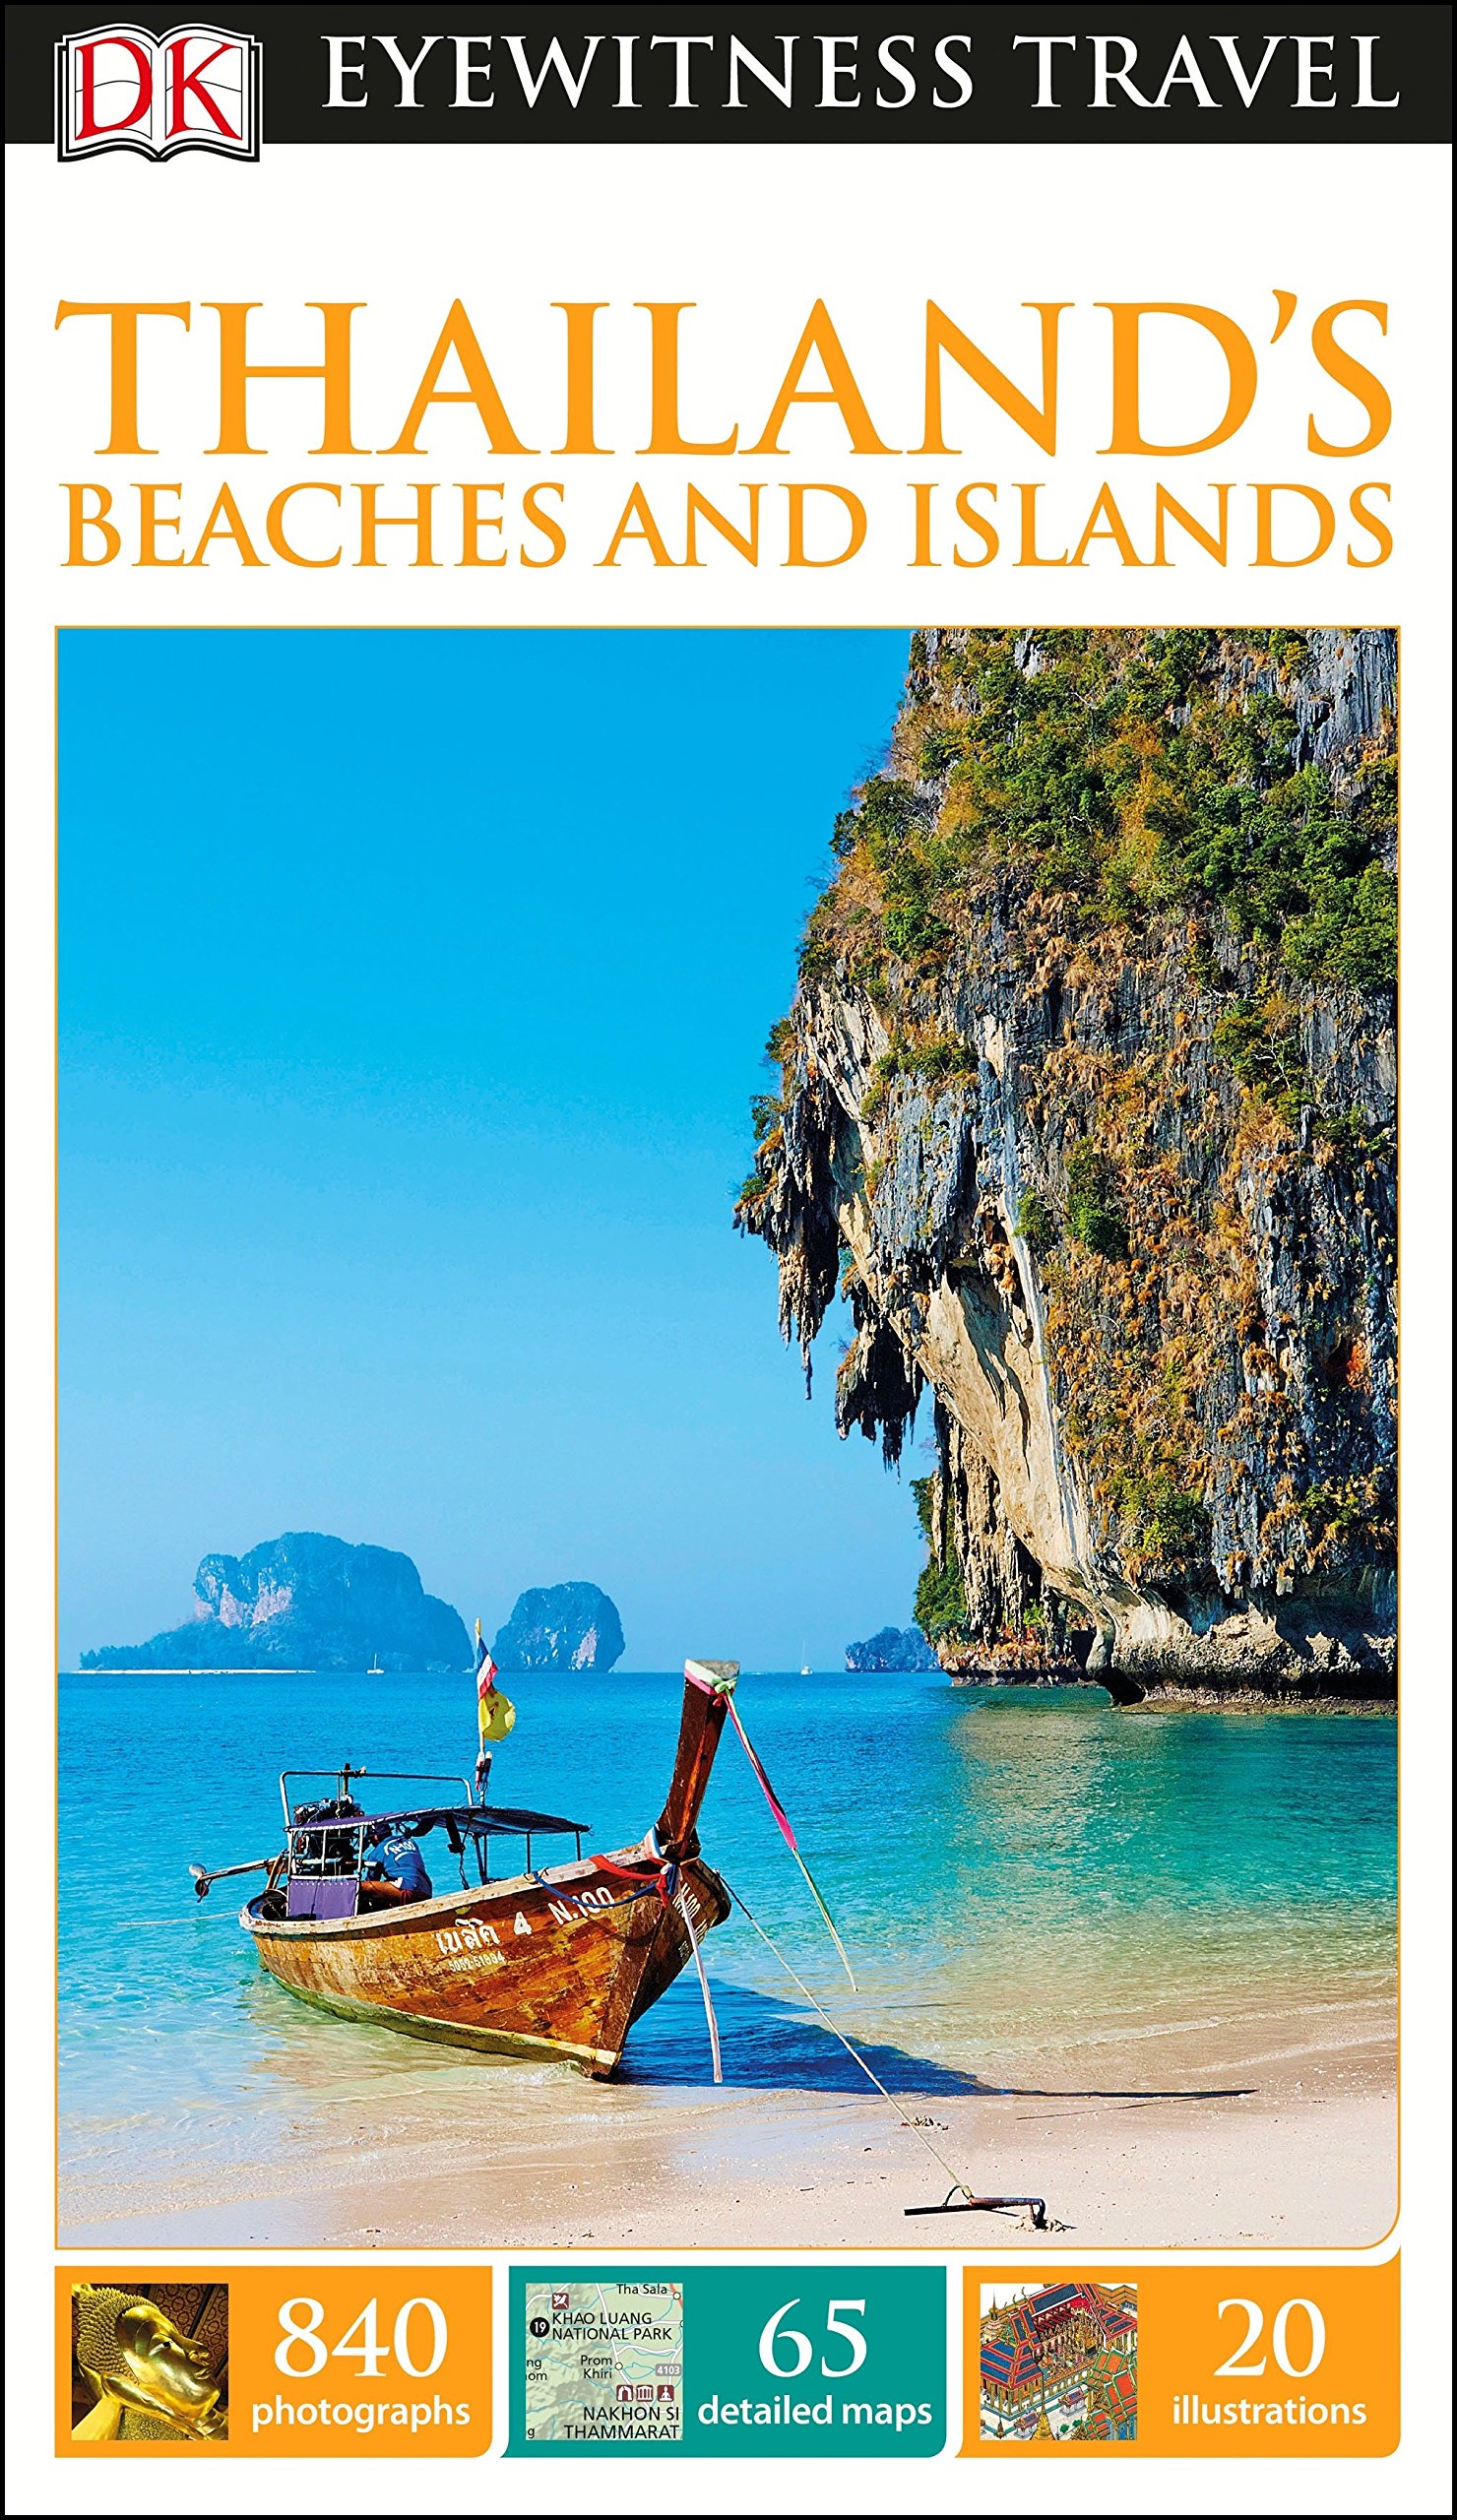 DK Eyewitness Thailand's Beaches and Islands (Travel Guide)